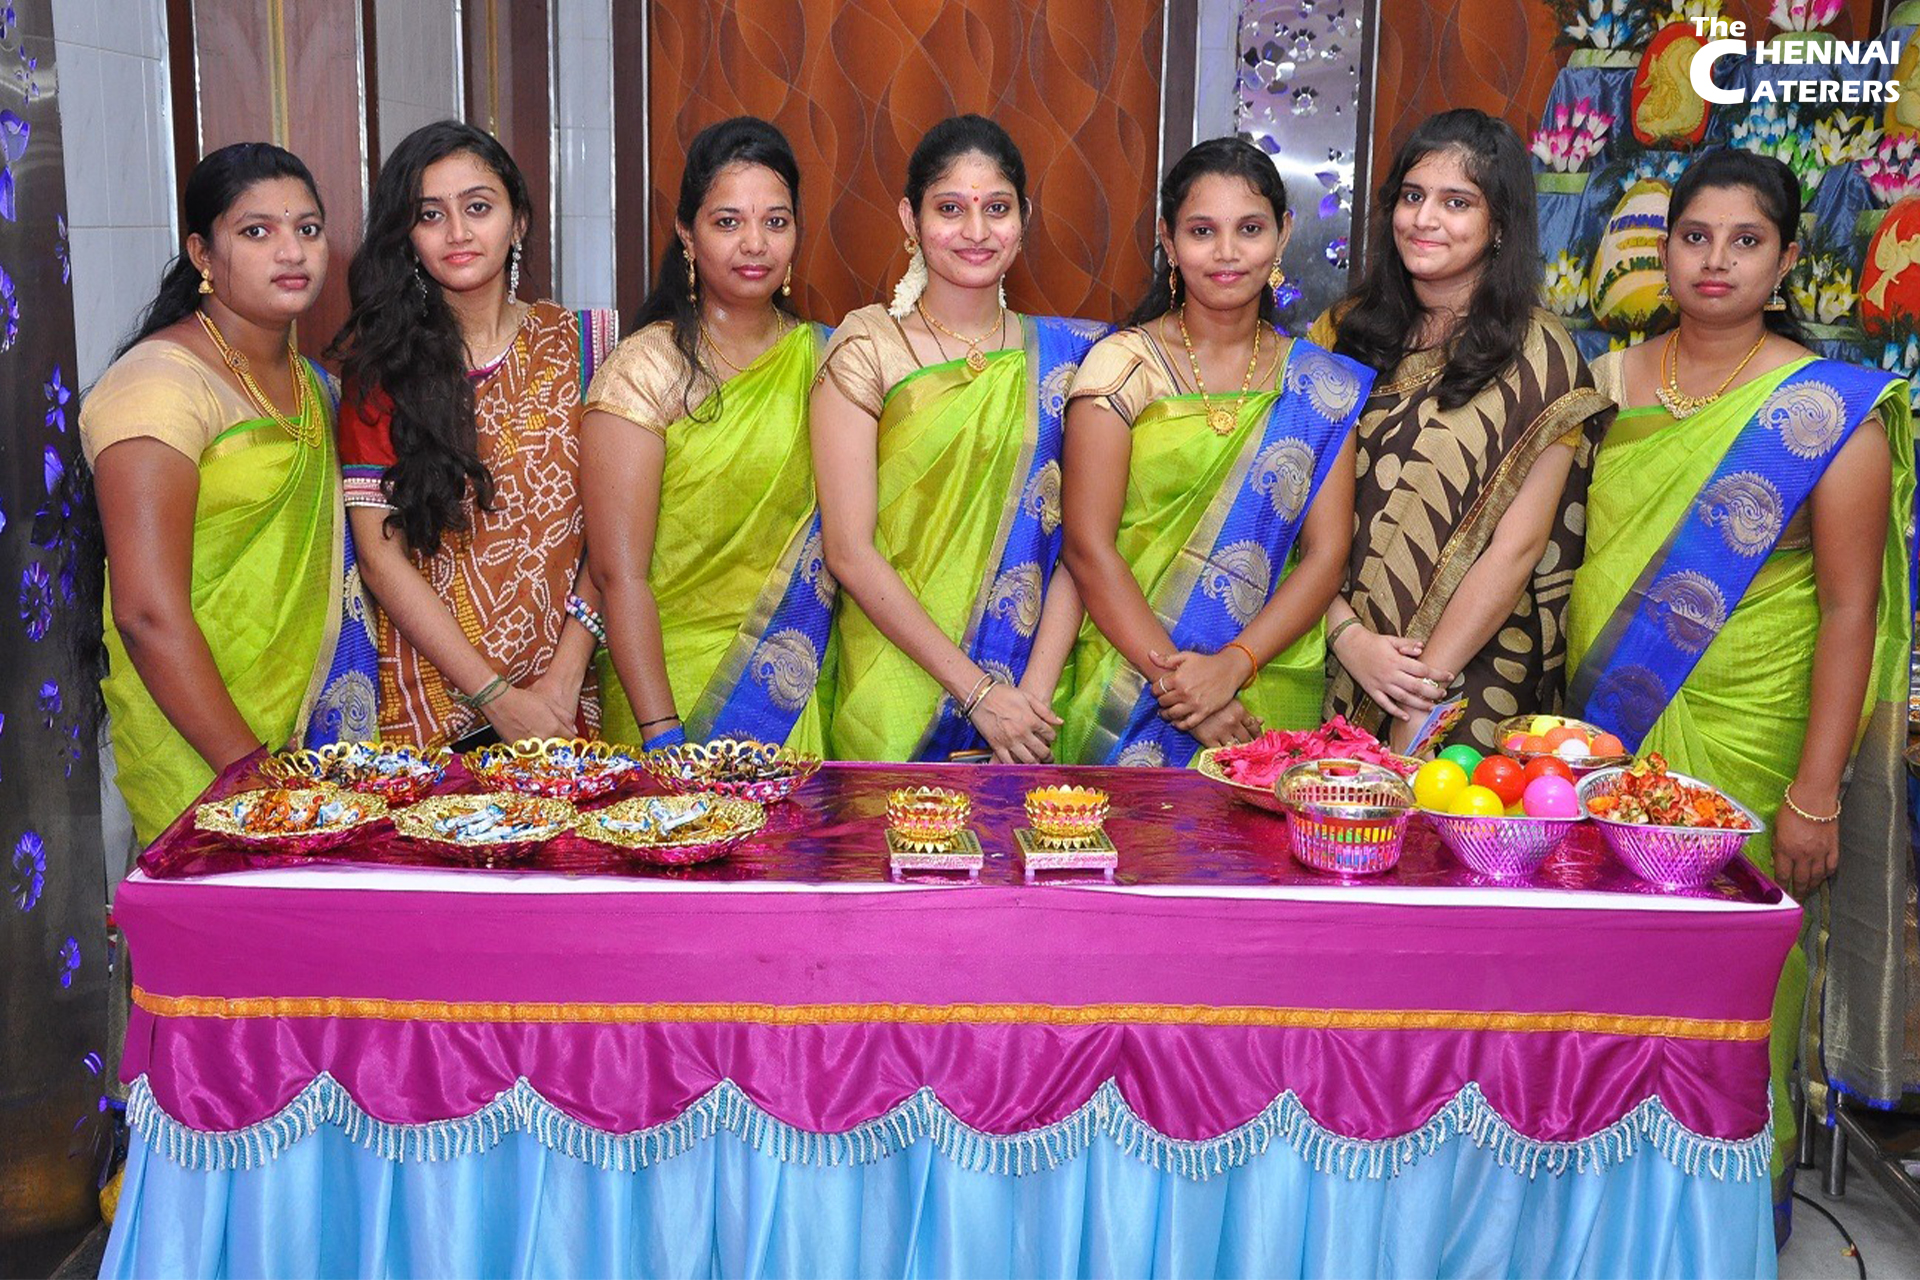 Chennai Caterers Welcome Girls